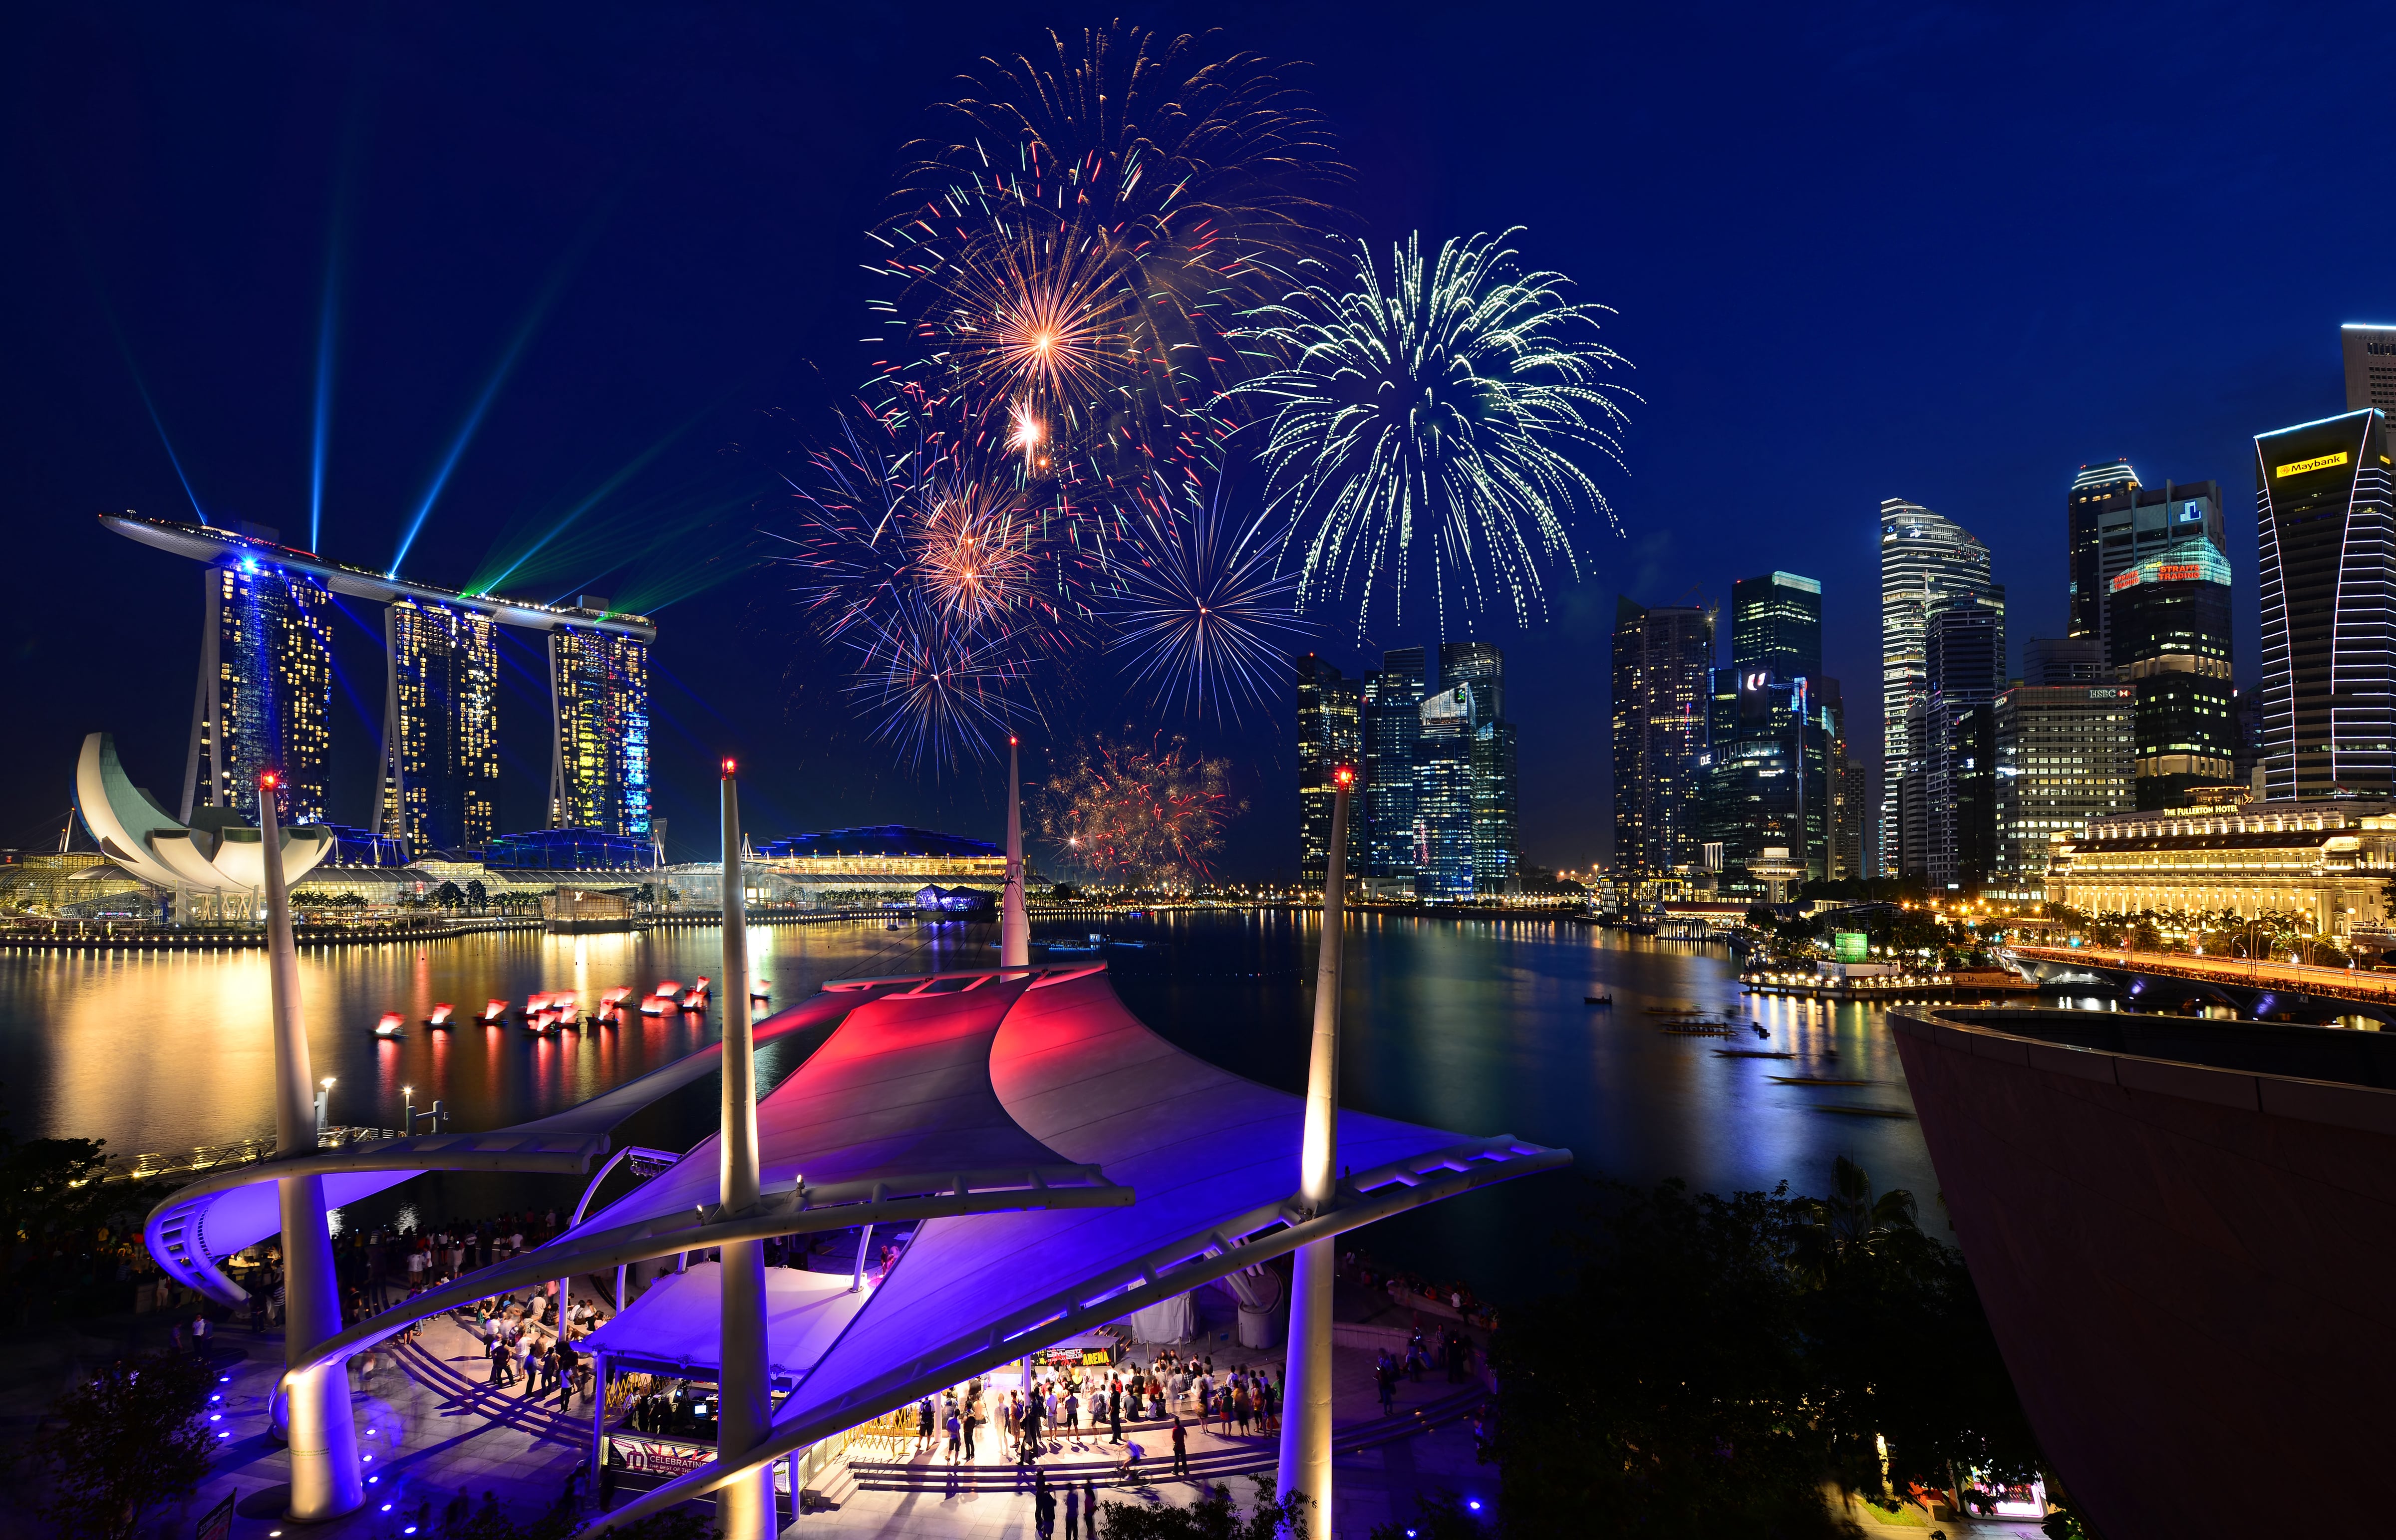 Singapore National Day Tours and Activities in August